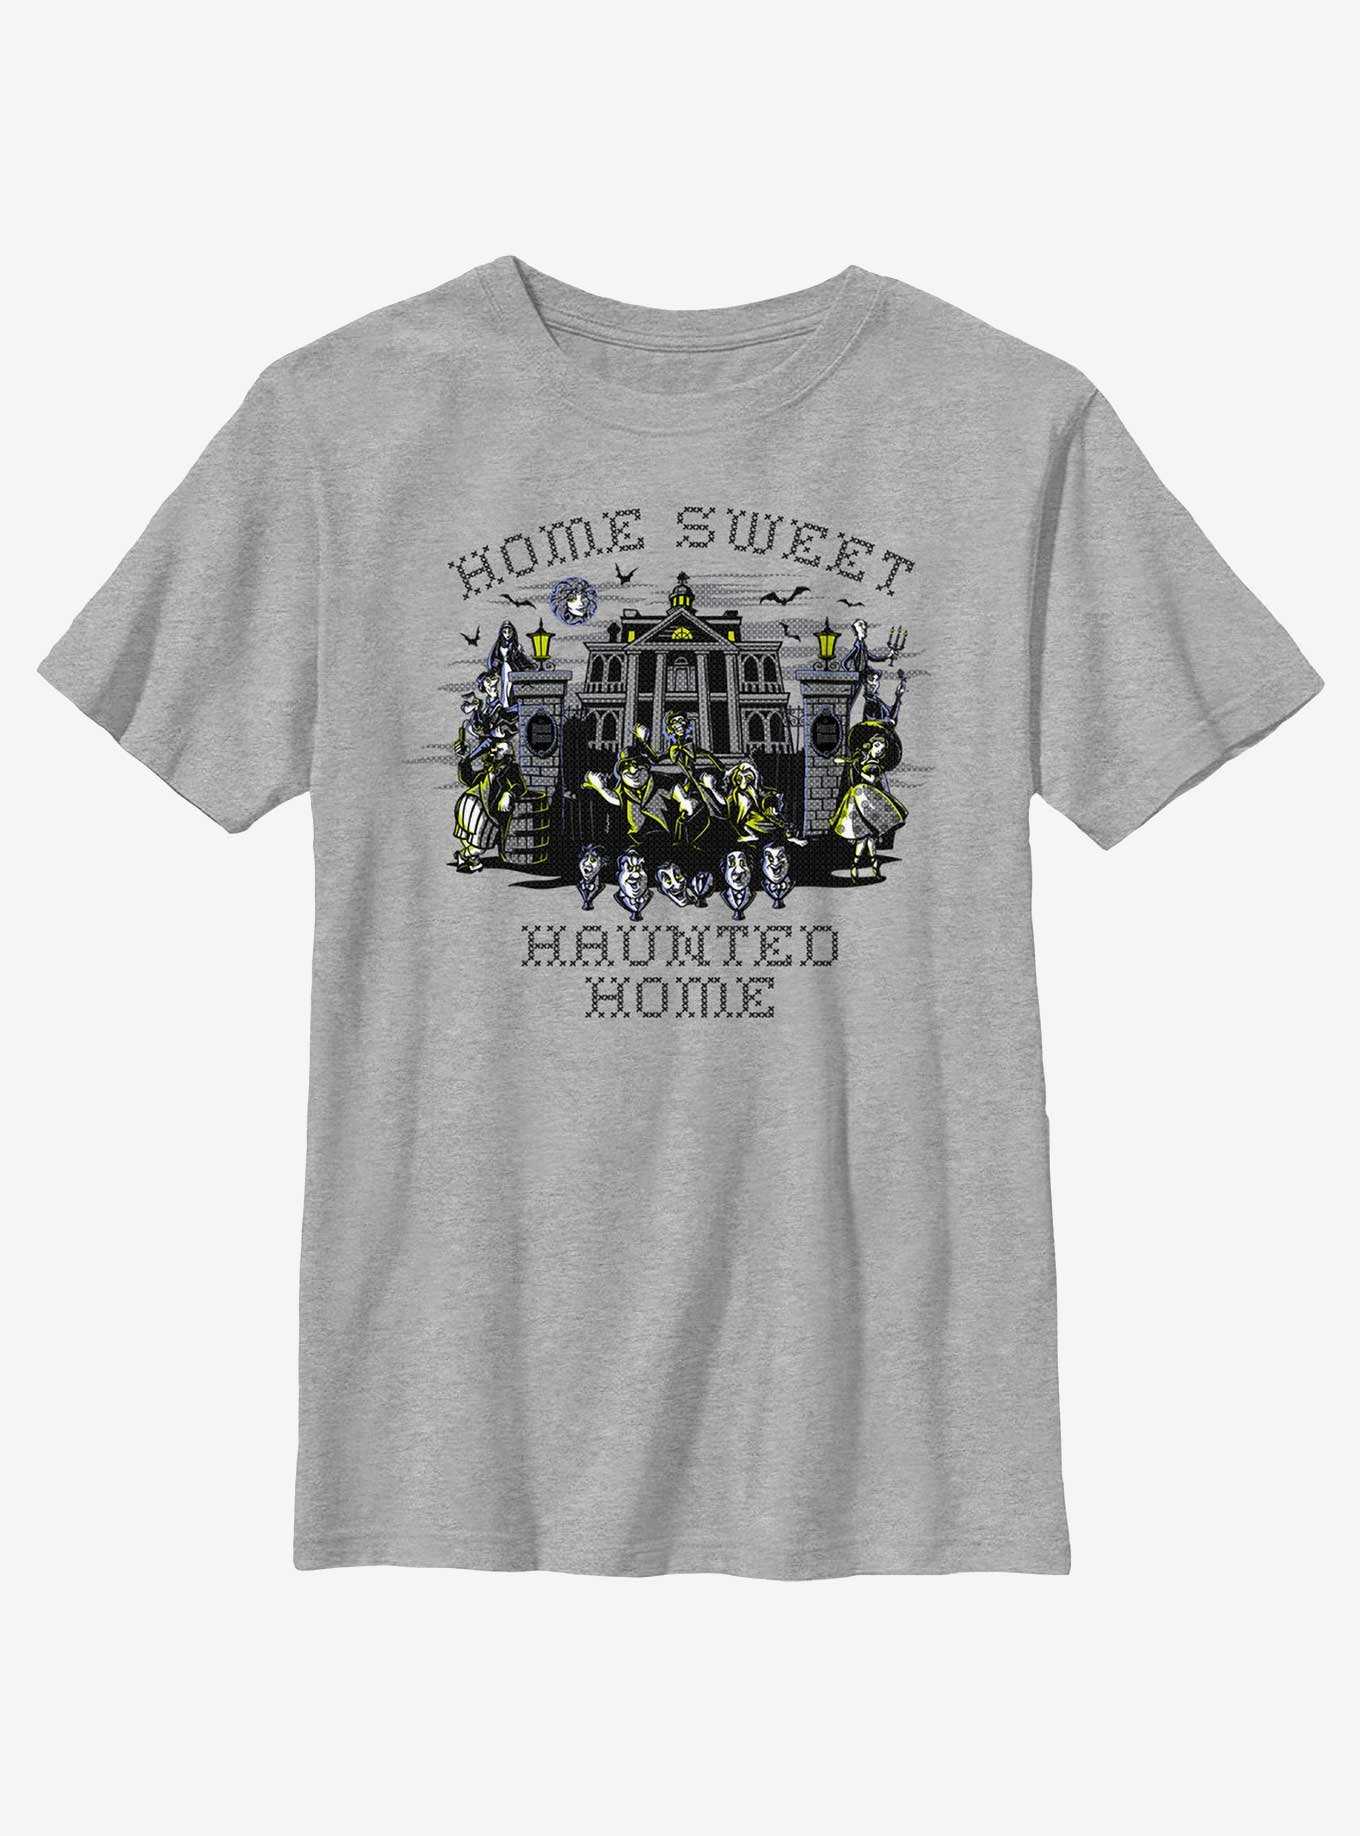 Disney Haunted Mansion Home Sweet Haunted Home Youth T-Shirt, , hi-res